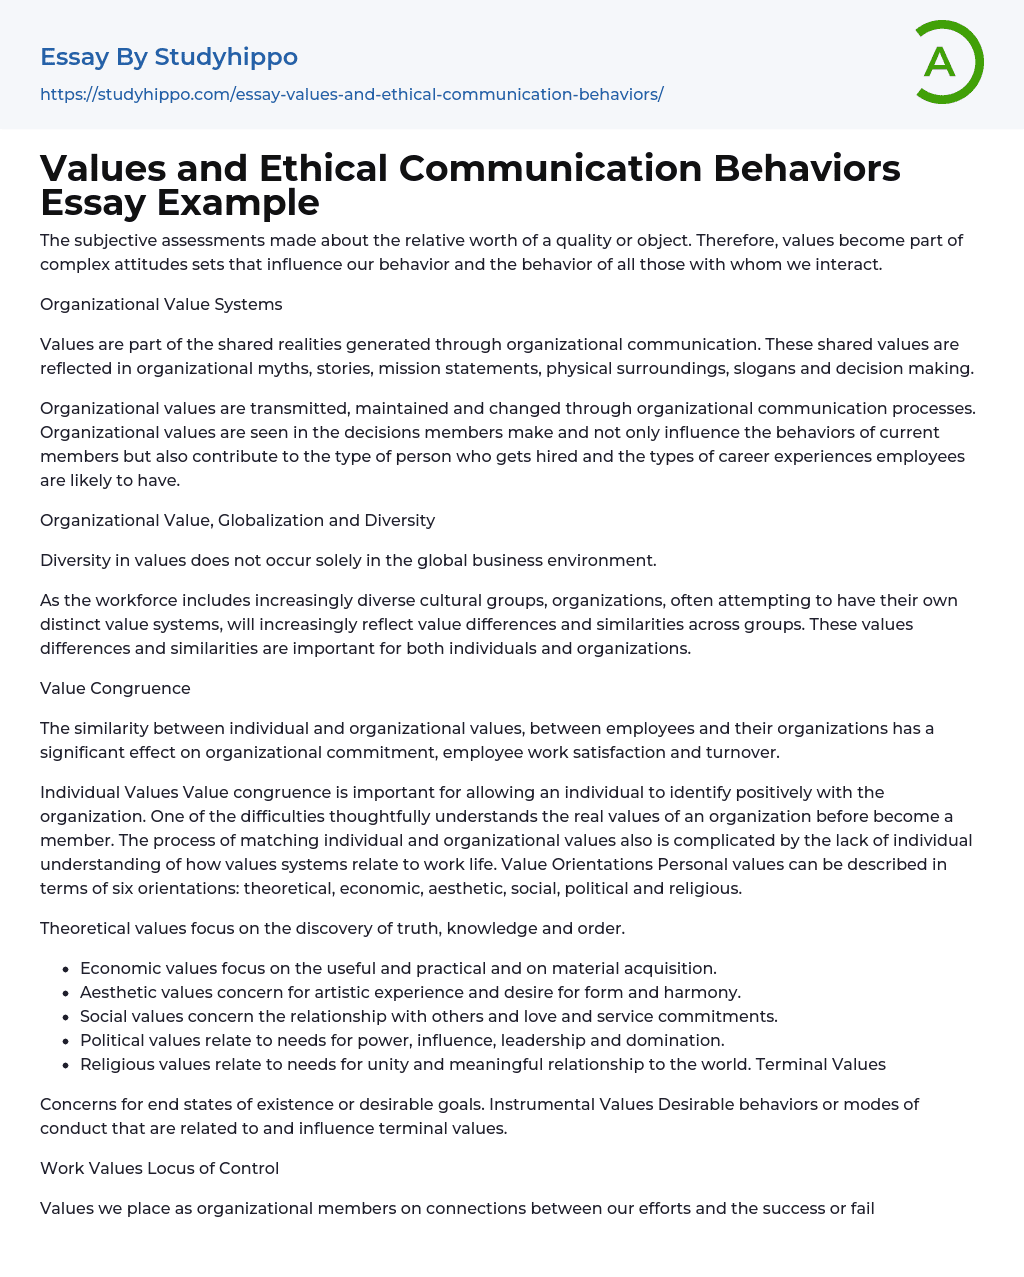 Values and Ethical Communication Behaviors Essay Example